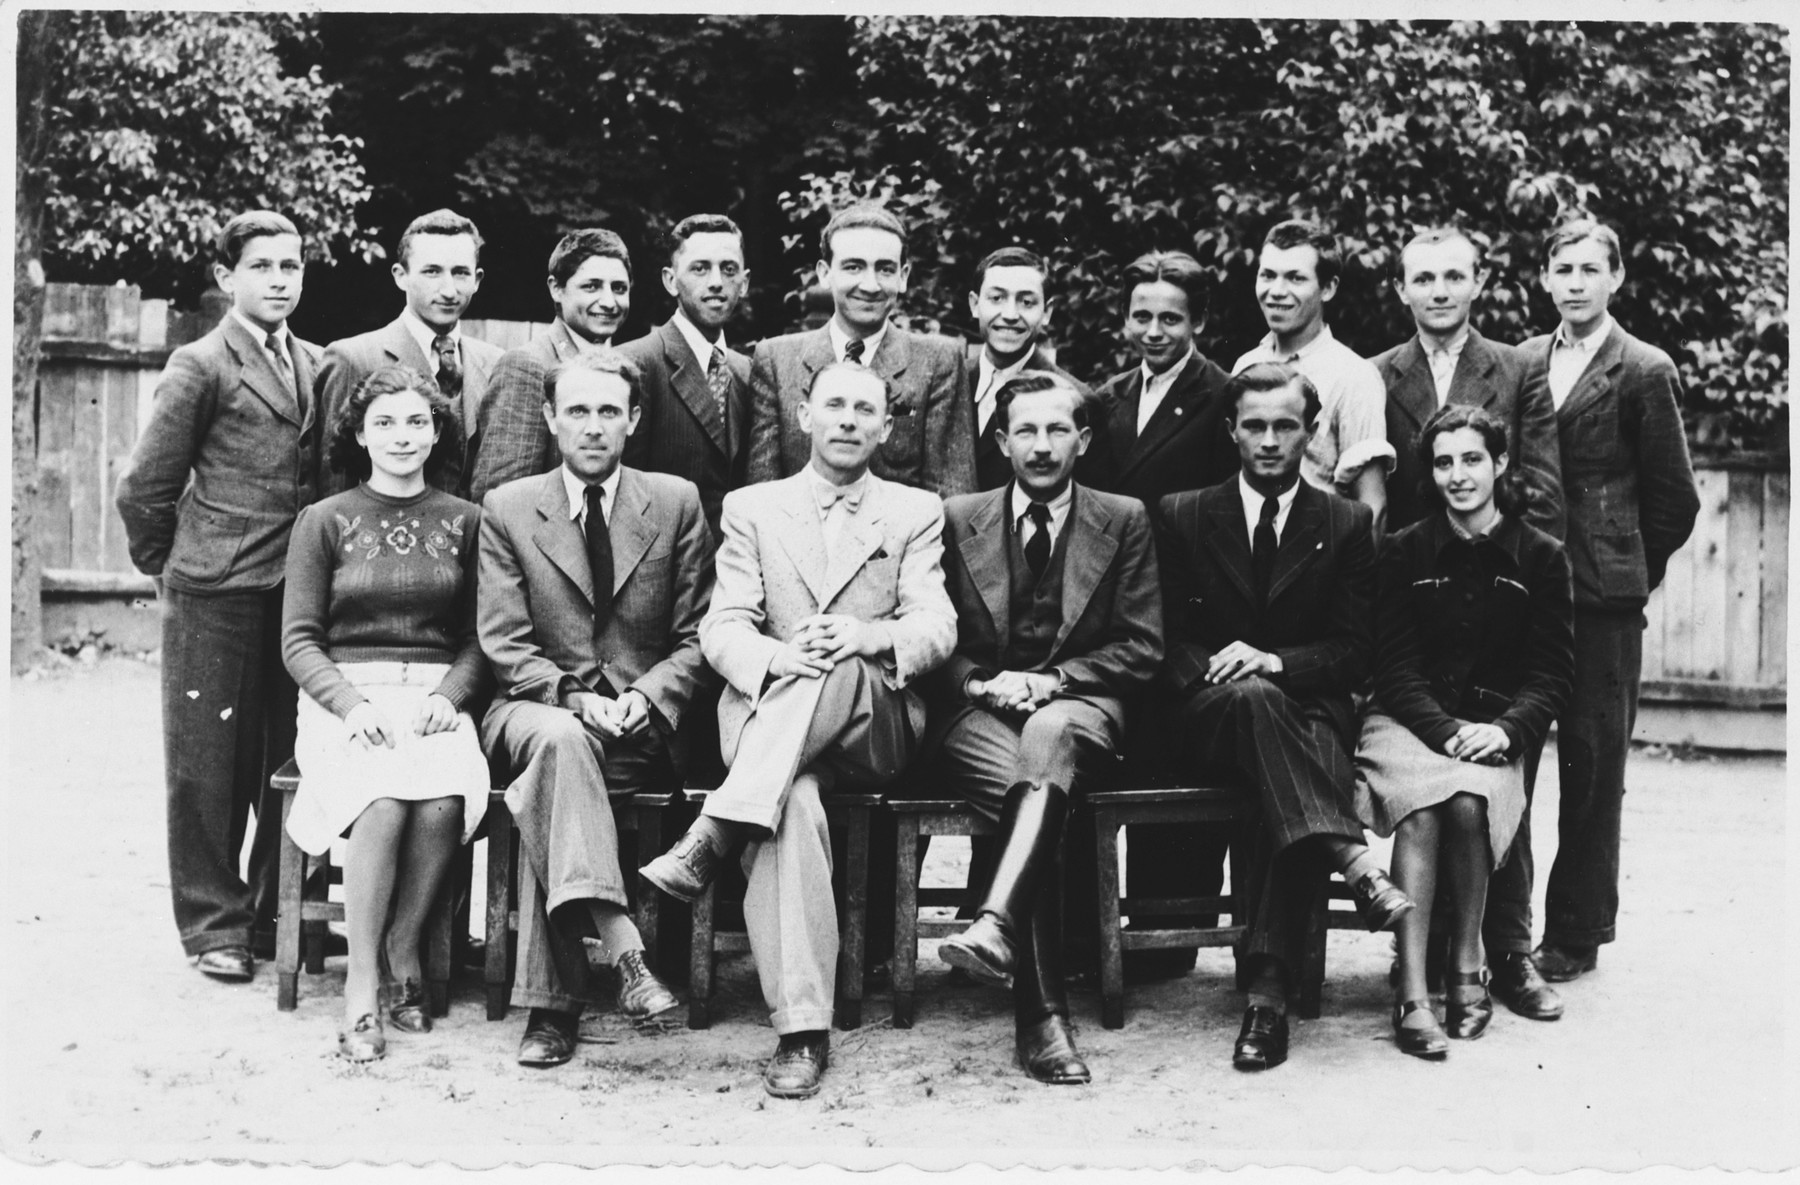 Group portrait of students and faculty at a vocational school in Tacovo.

Among those pictured is Goldie Berger (front row, left).